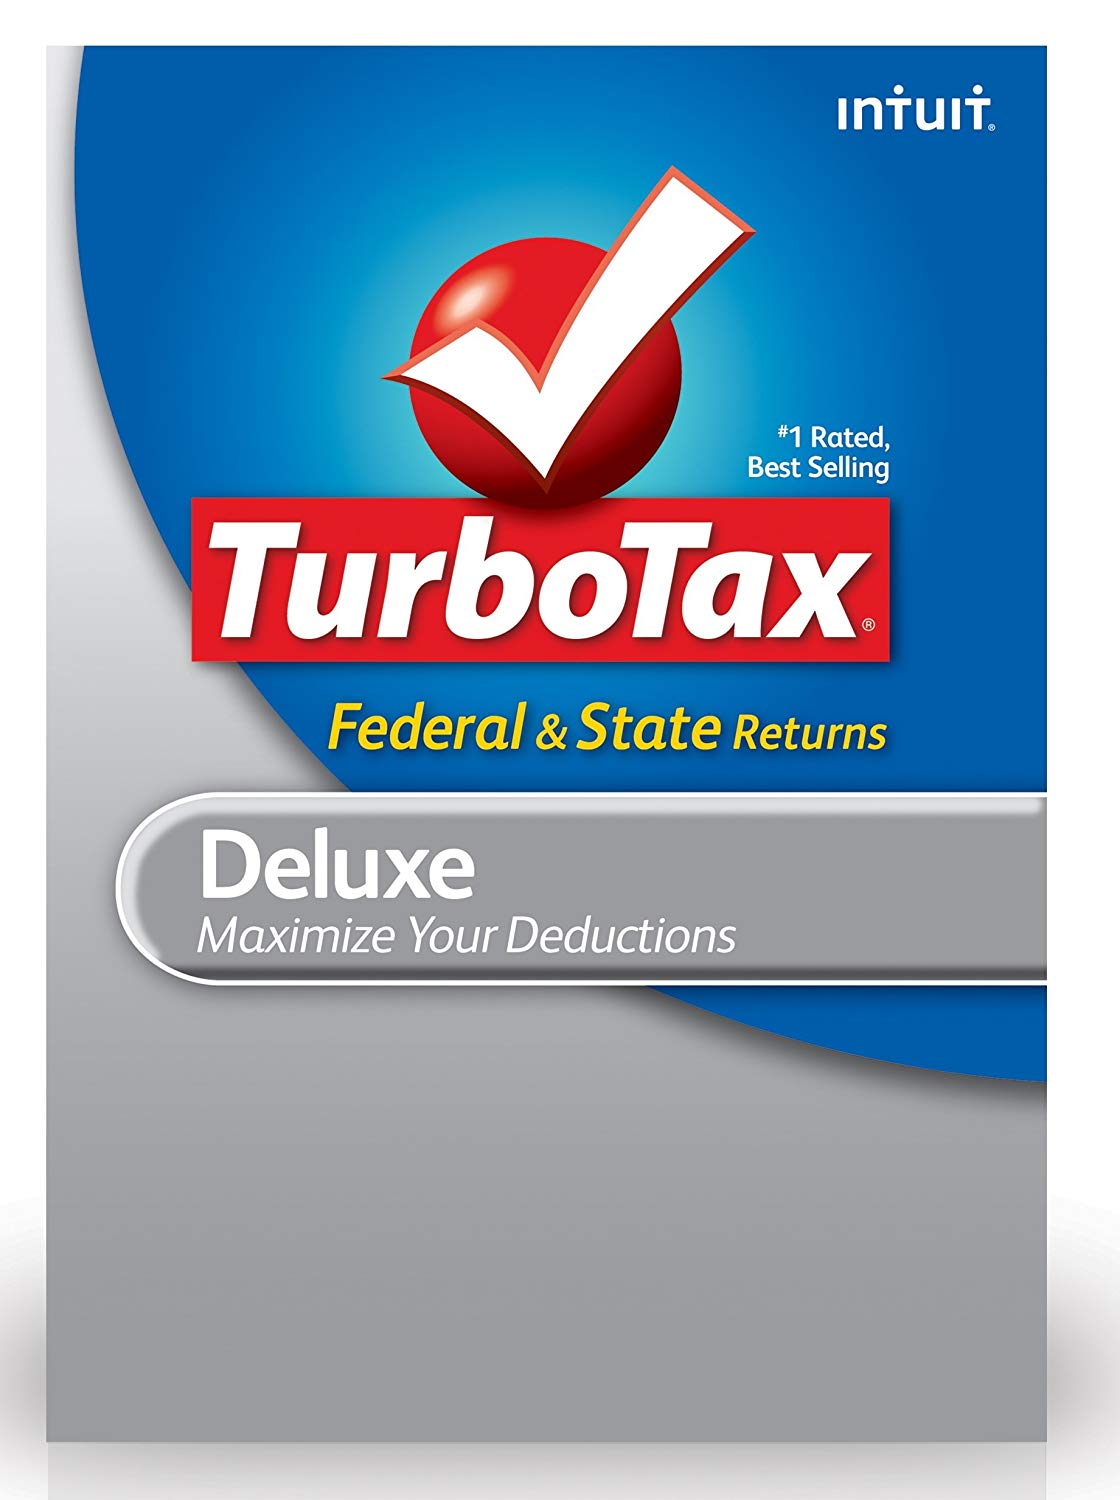 turbotax 2014 home and business free download